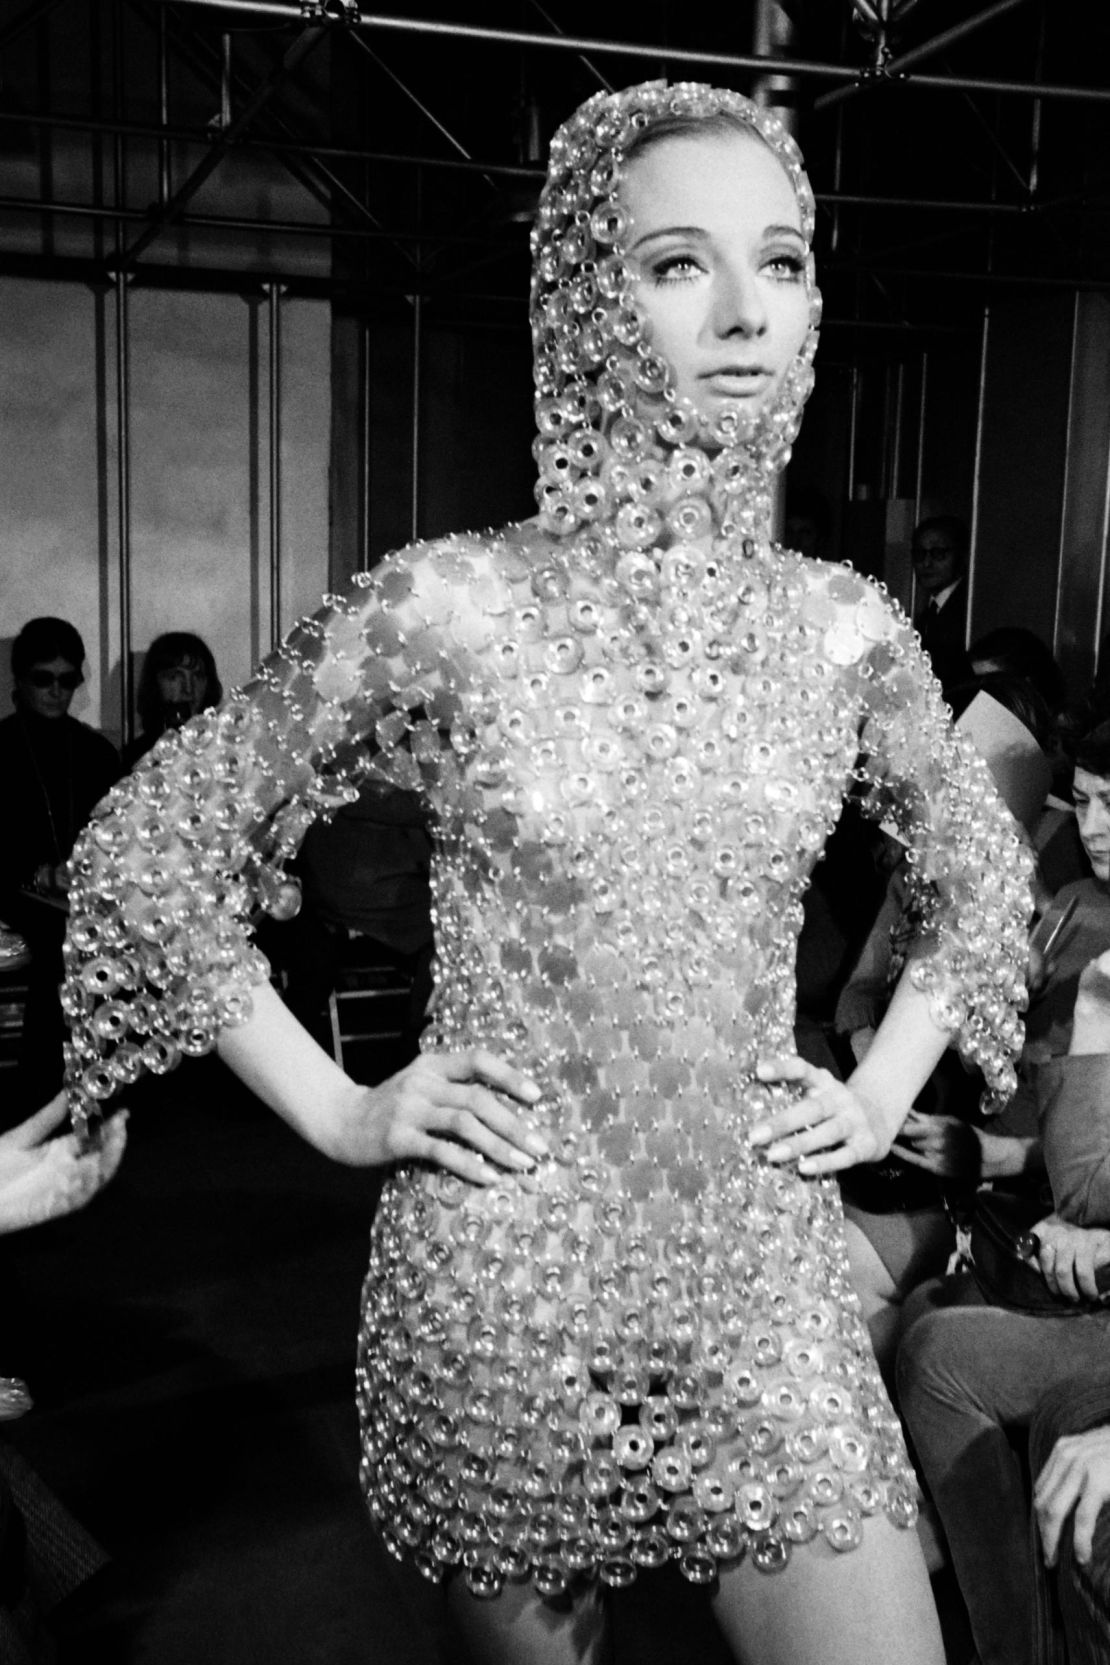 Paco Rabanne's early sci-fi designs made models look like they were dripping in metal.